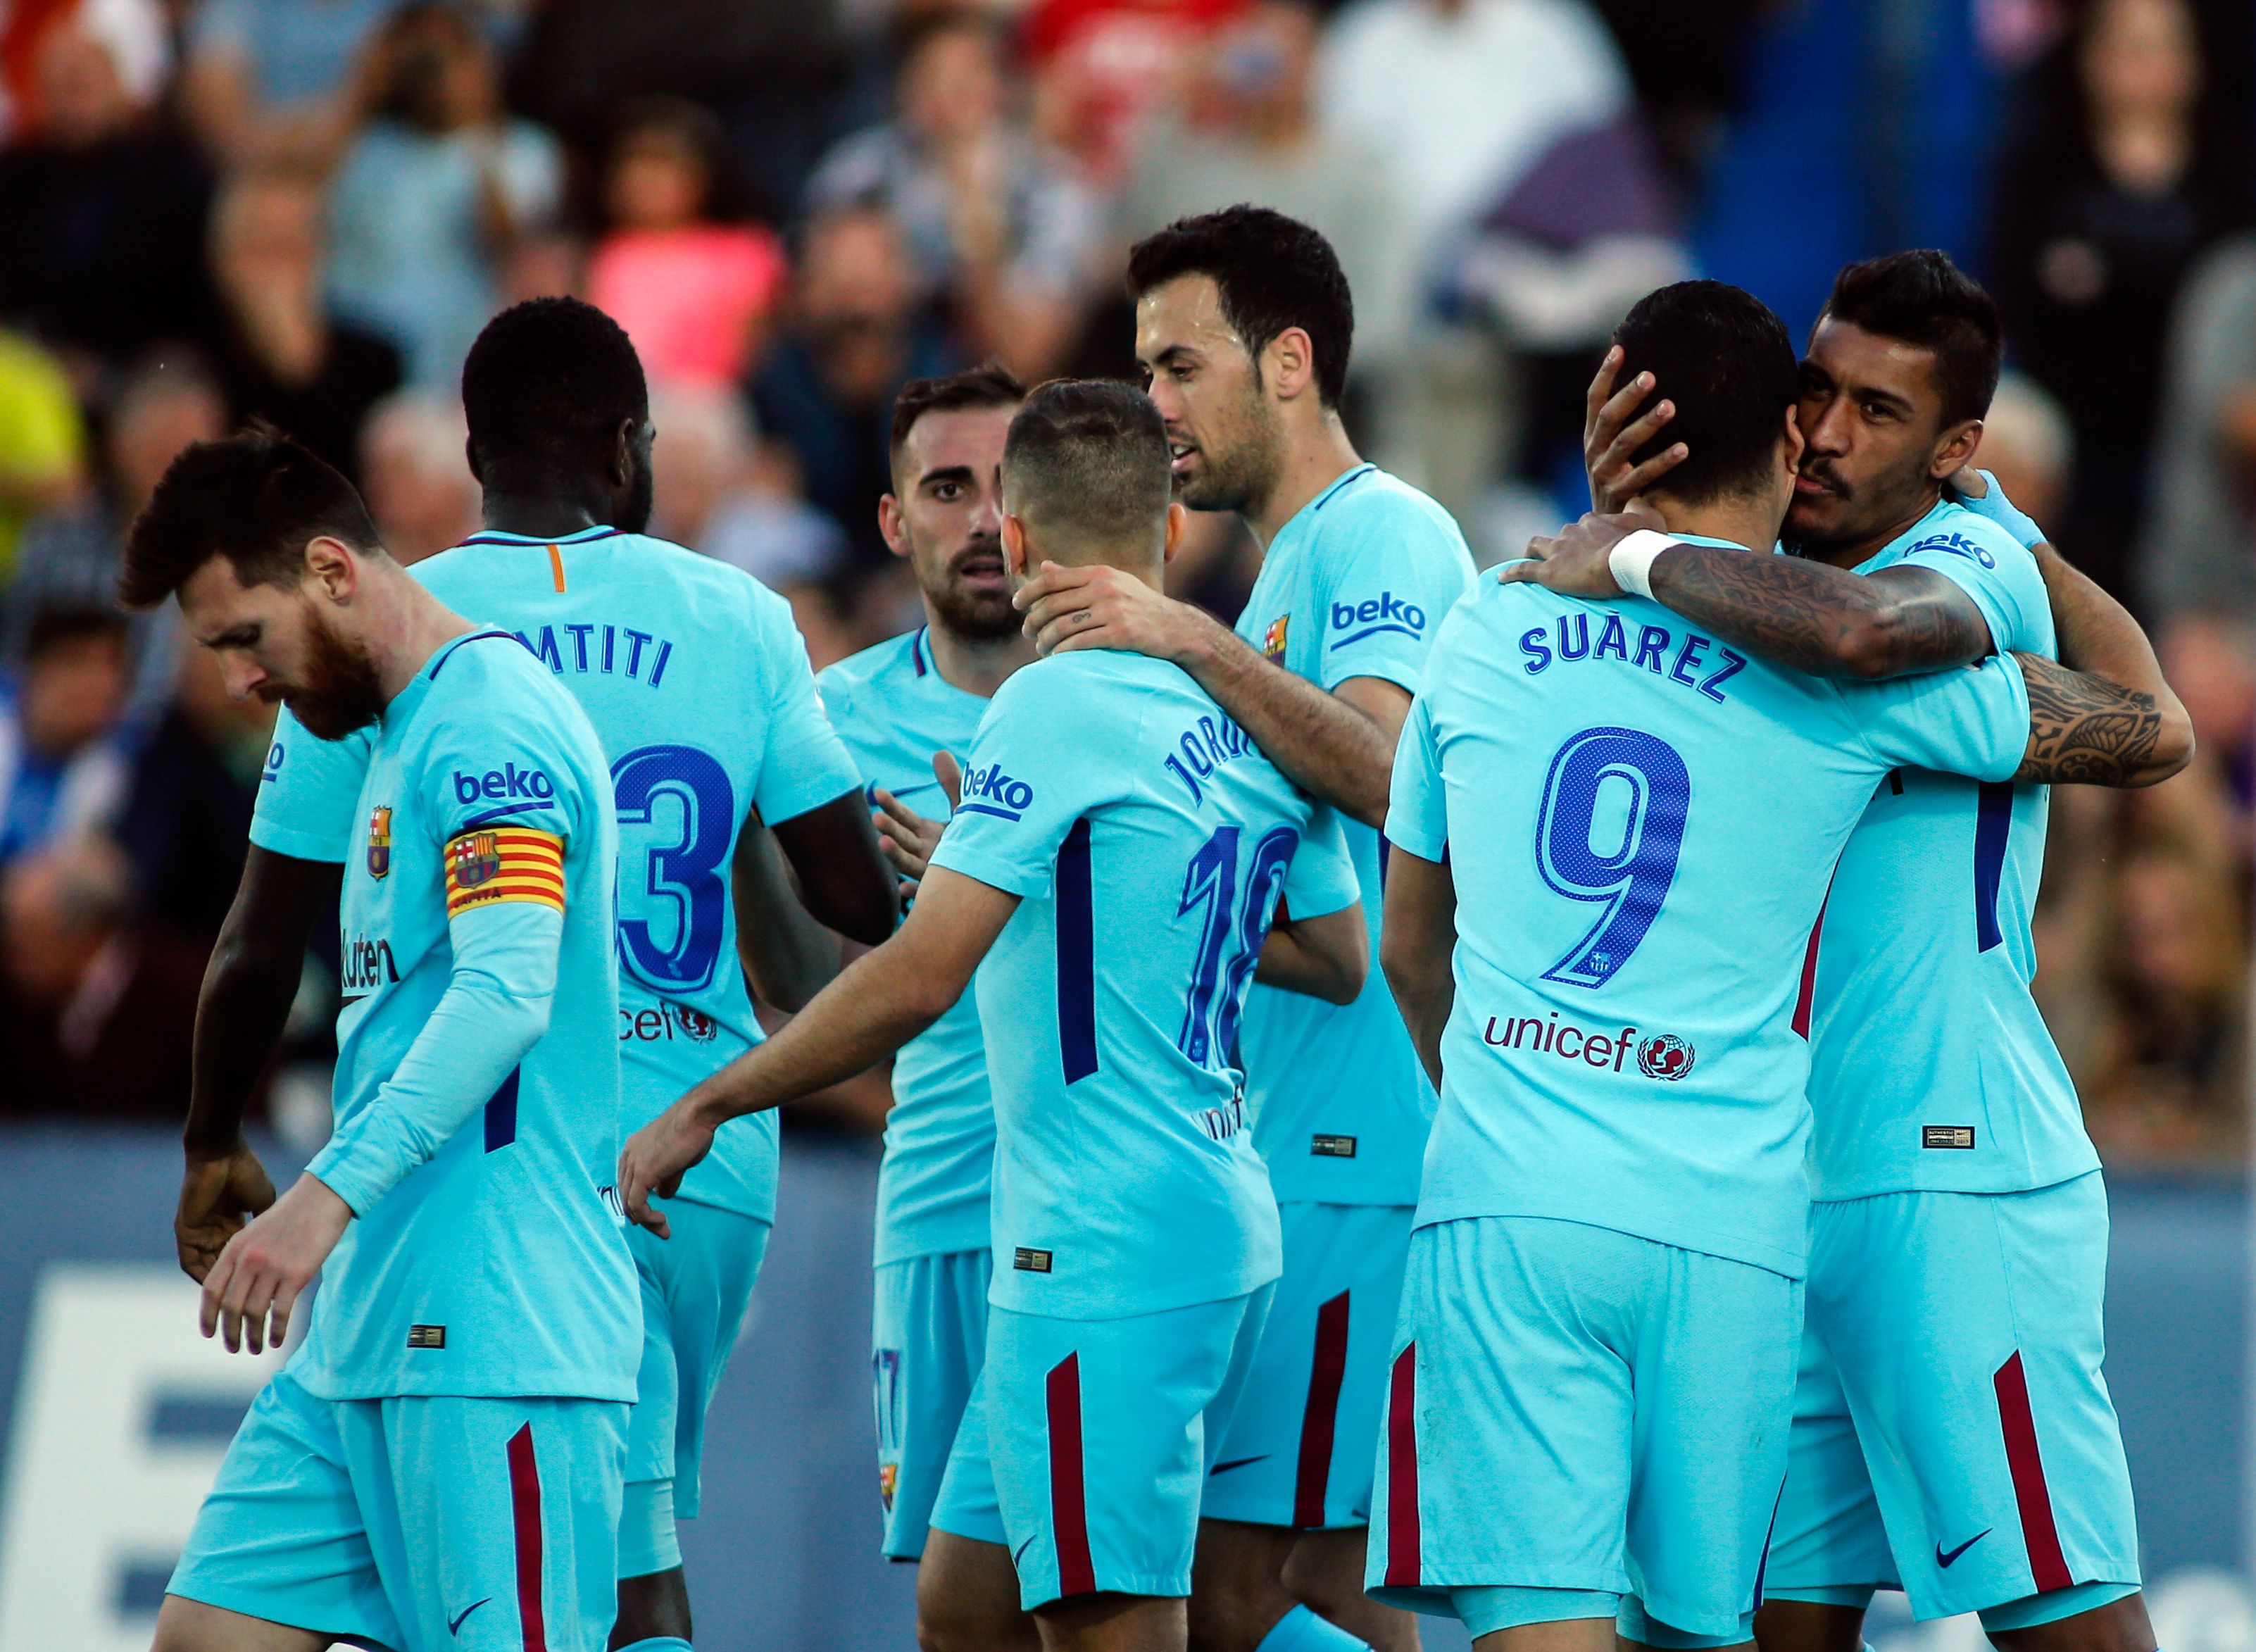 Barcelona's players celebrate a goal during the Spanish league football match Leganes vs Barcelona at the Butarque stadium in Leganes on November 18, 2017. / AFP PHOTO / OSCAR DEL POZO        (Photo credit should read OSCAR DEL POZO/AFP/Getty Images)